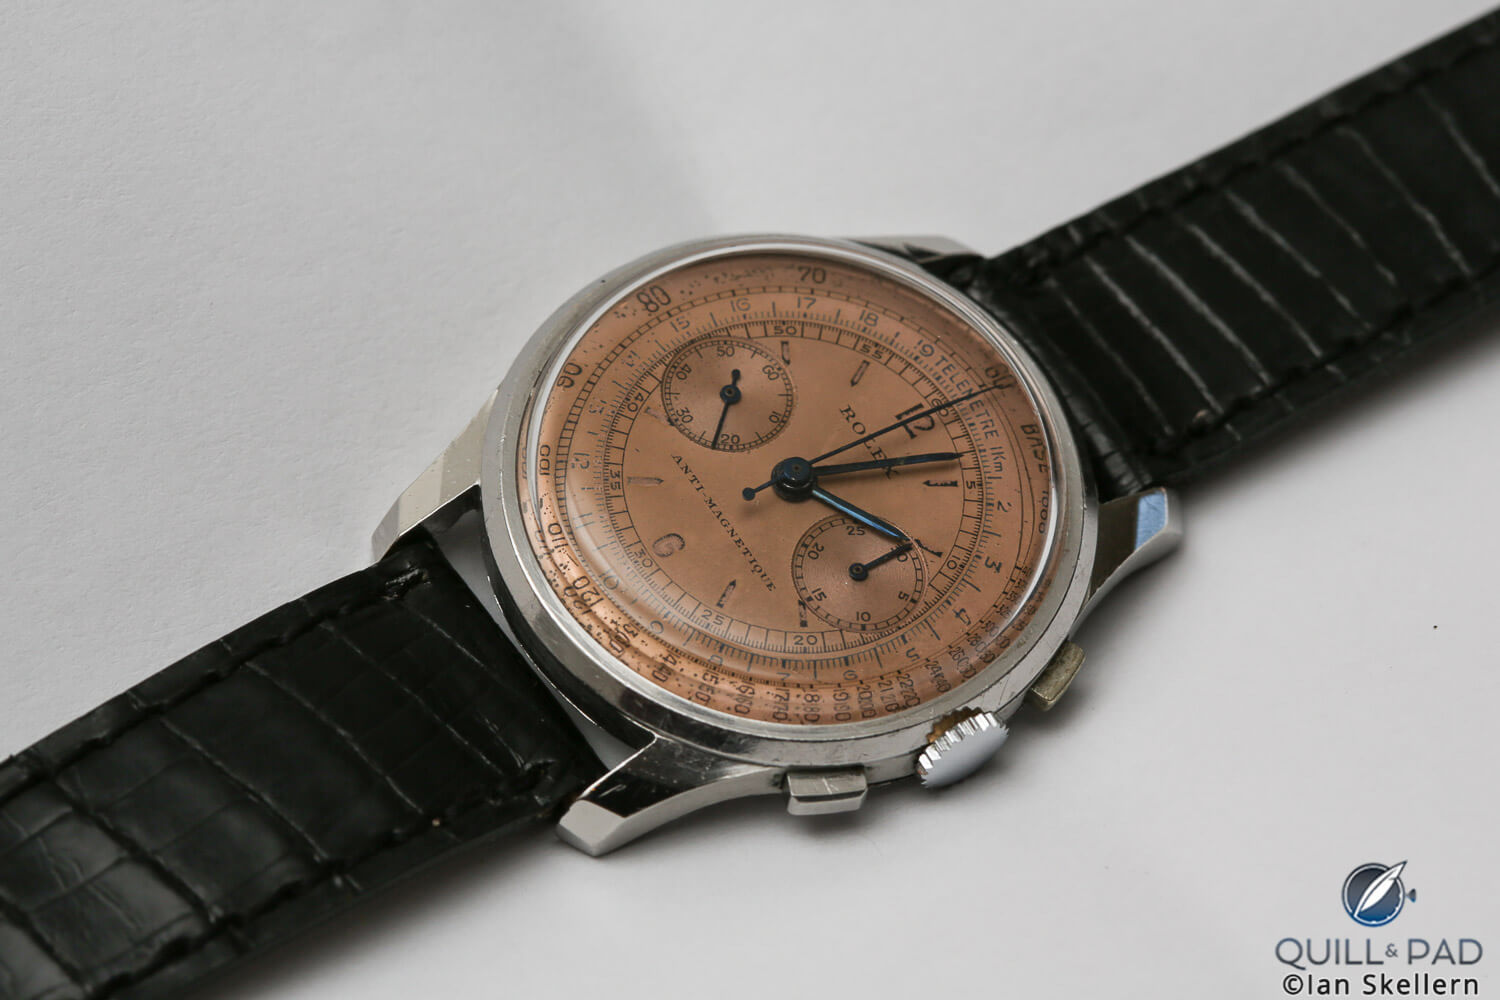 Rolex Reference 3834 from Gerd-Rüdiger Lang’s extensive chronograph collection